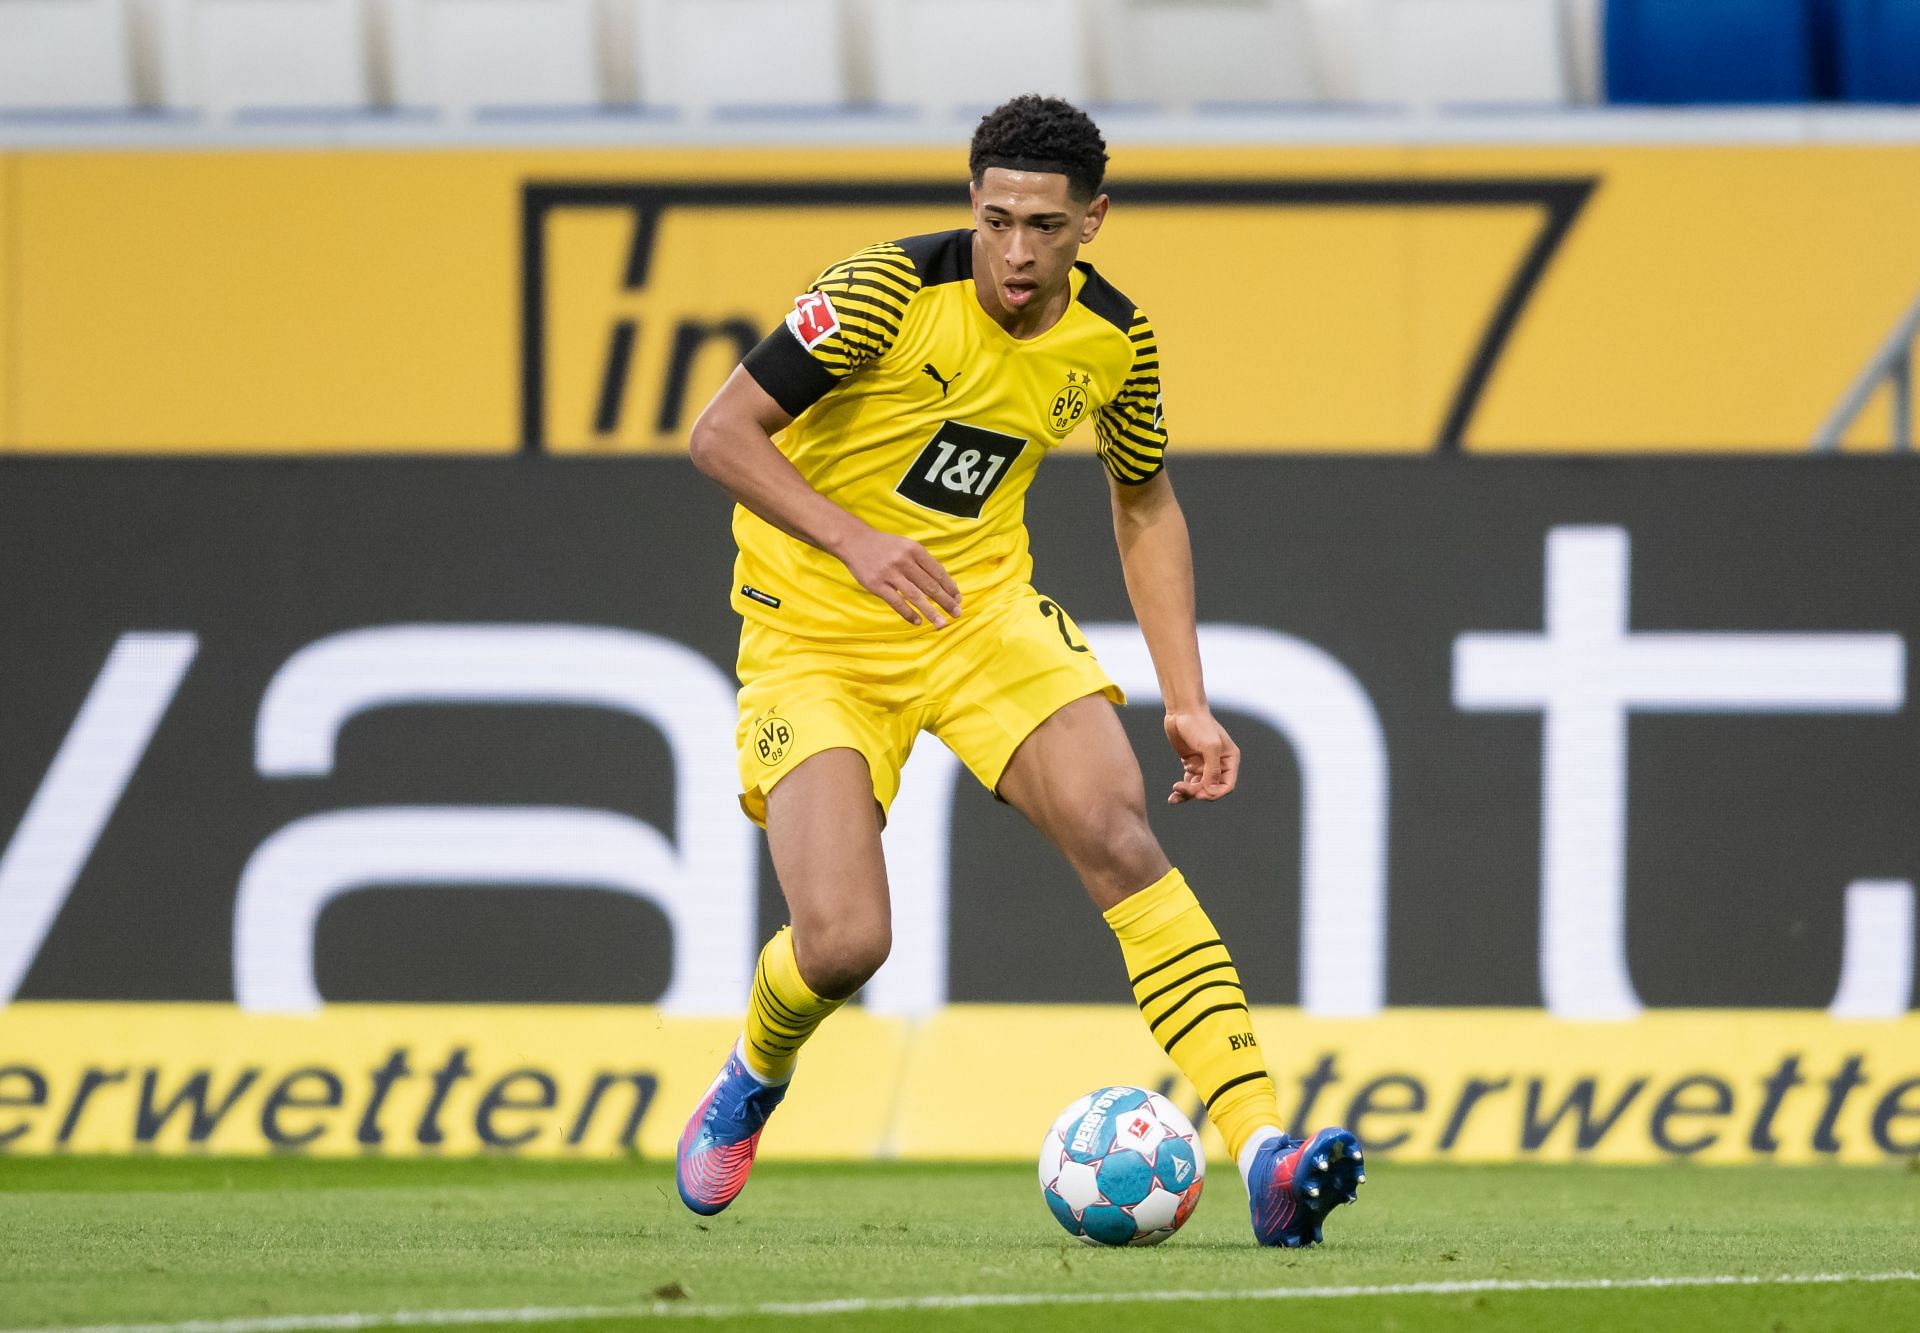 Jude Bellingham is one of the most valuable players at Borussia Dortmund.